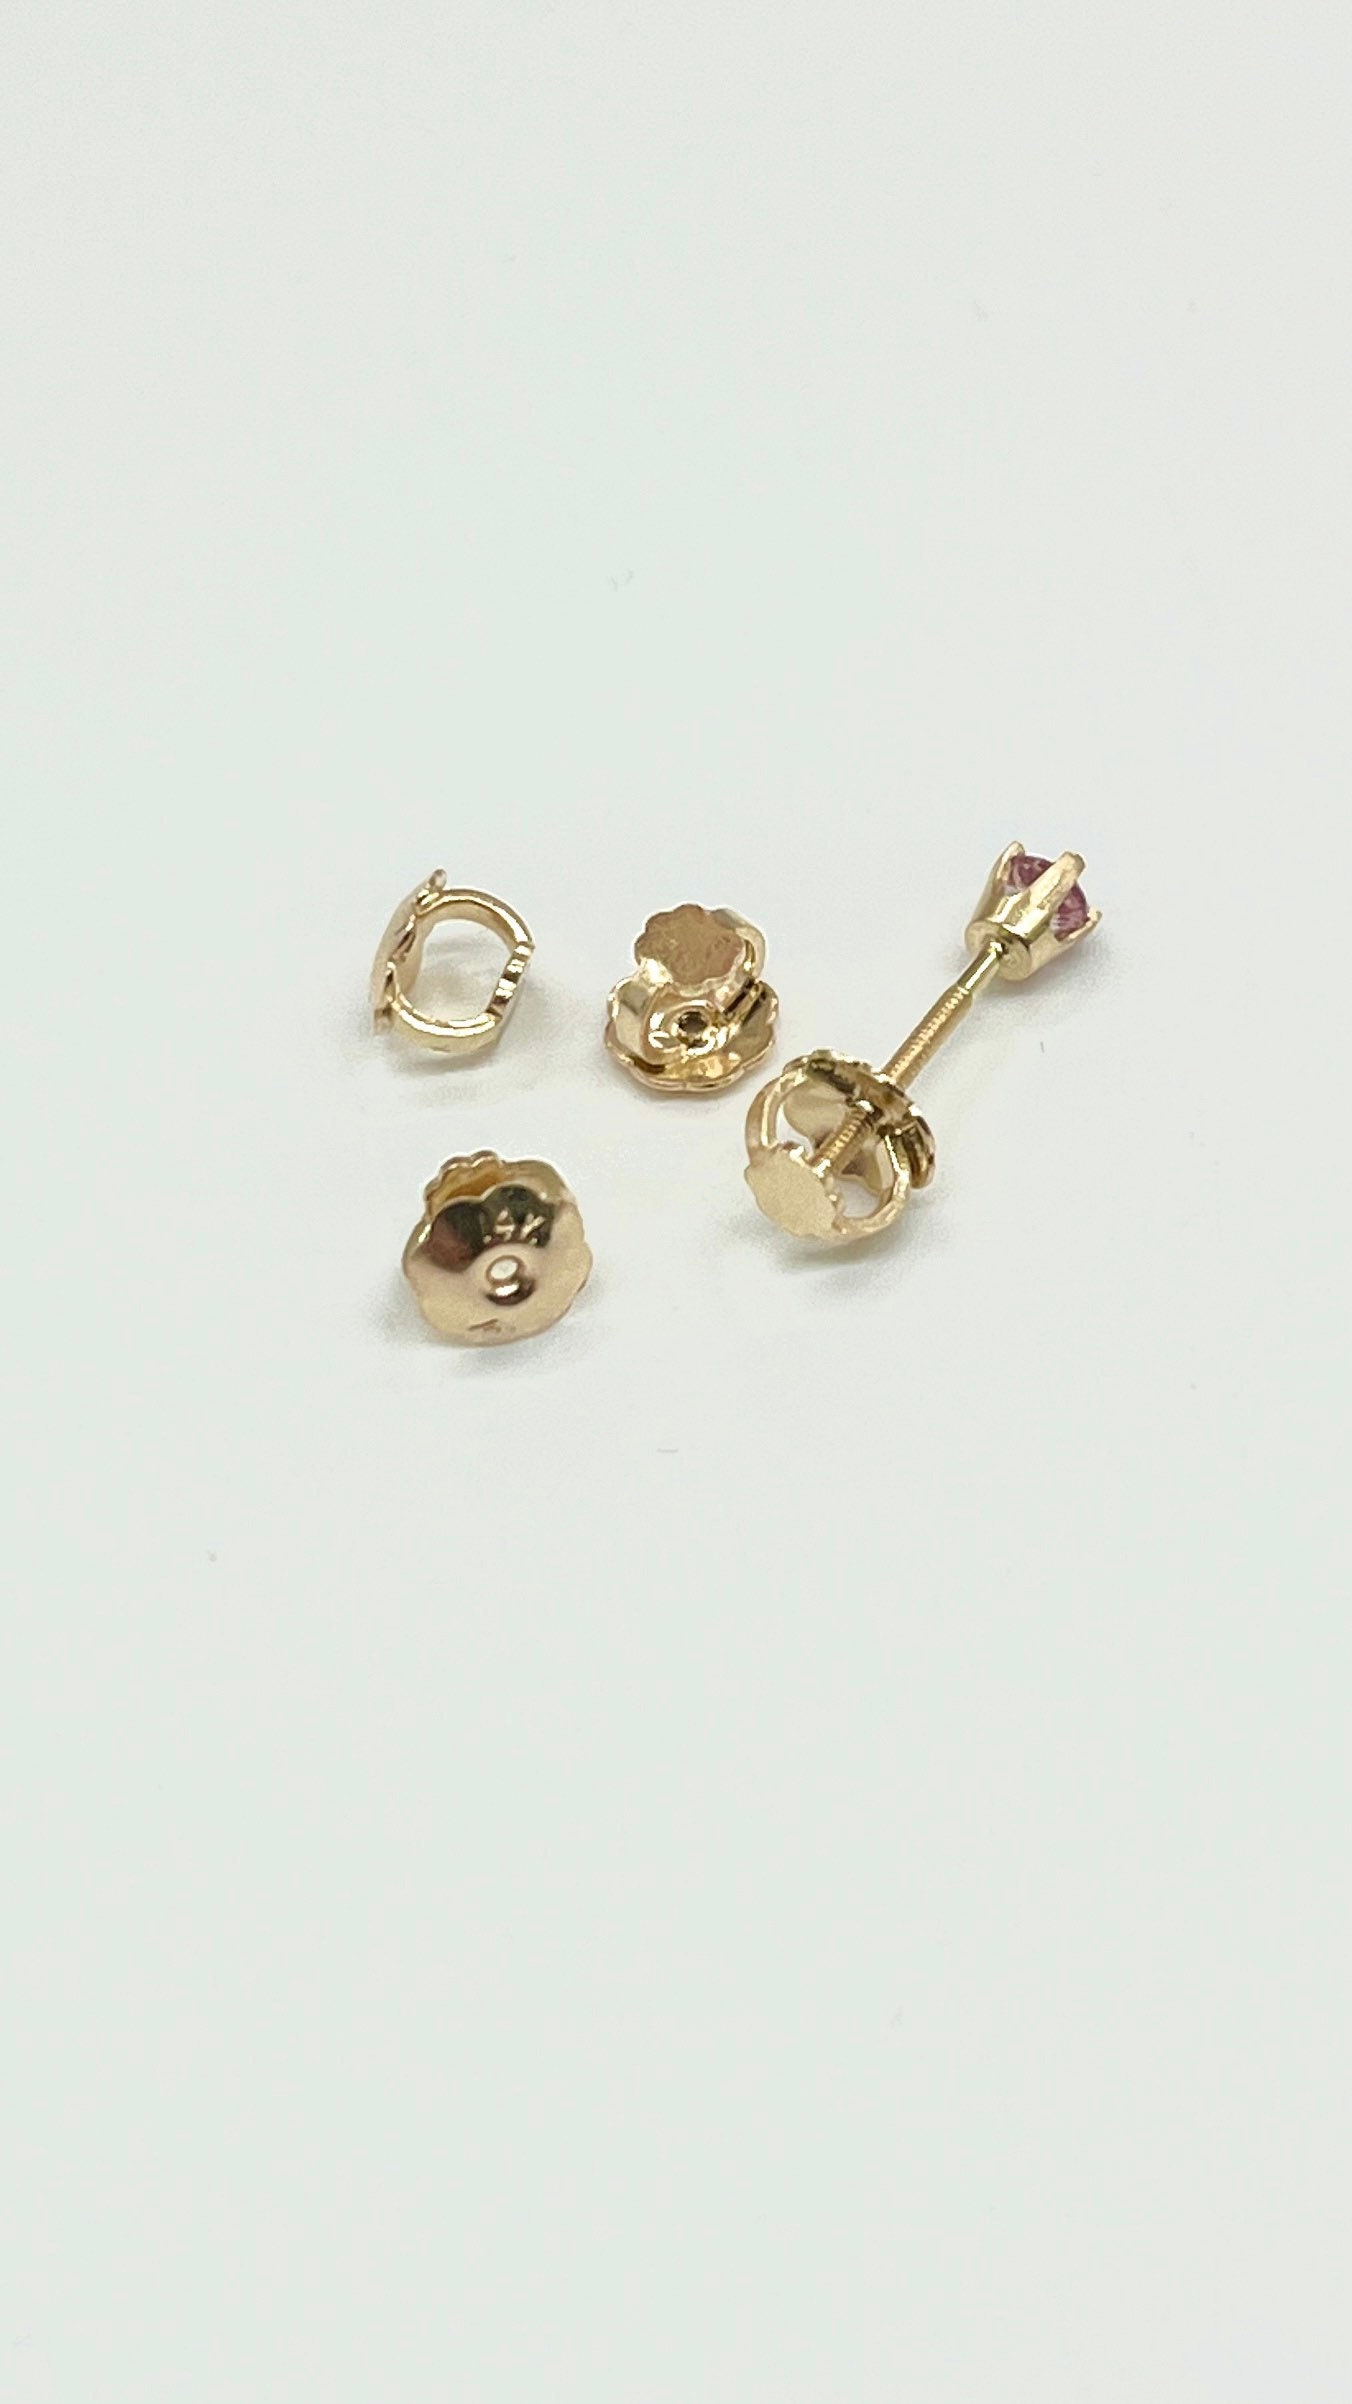 Spare Extra Replacement Gold Screw Backs, Screw Back for Threaded Post  Earrings, for 1000 Jewels Screw-back Earrings, 2 Sizes, Earring Backs 